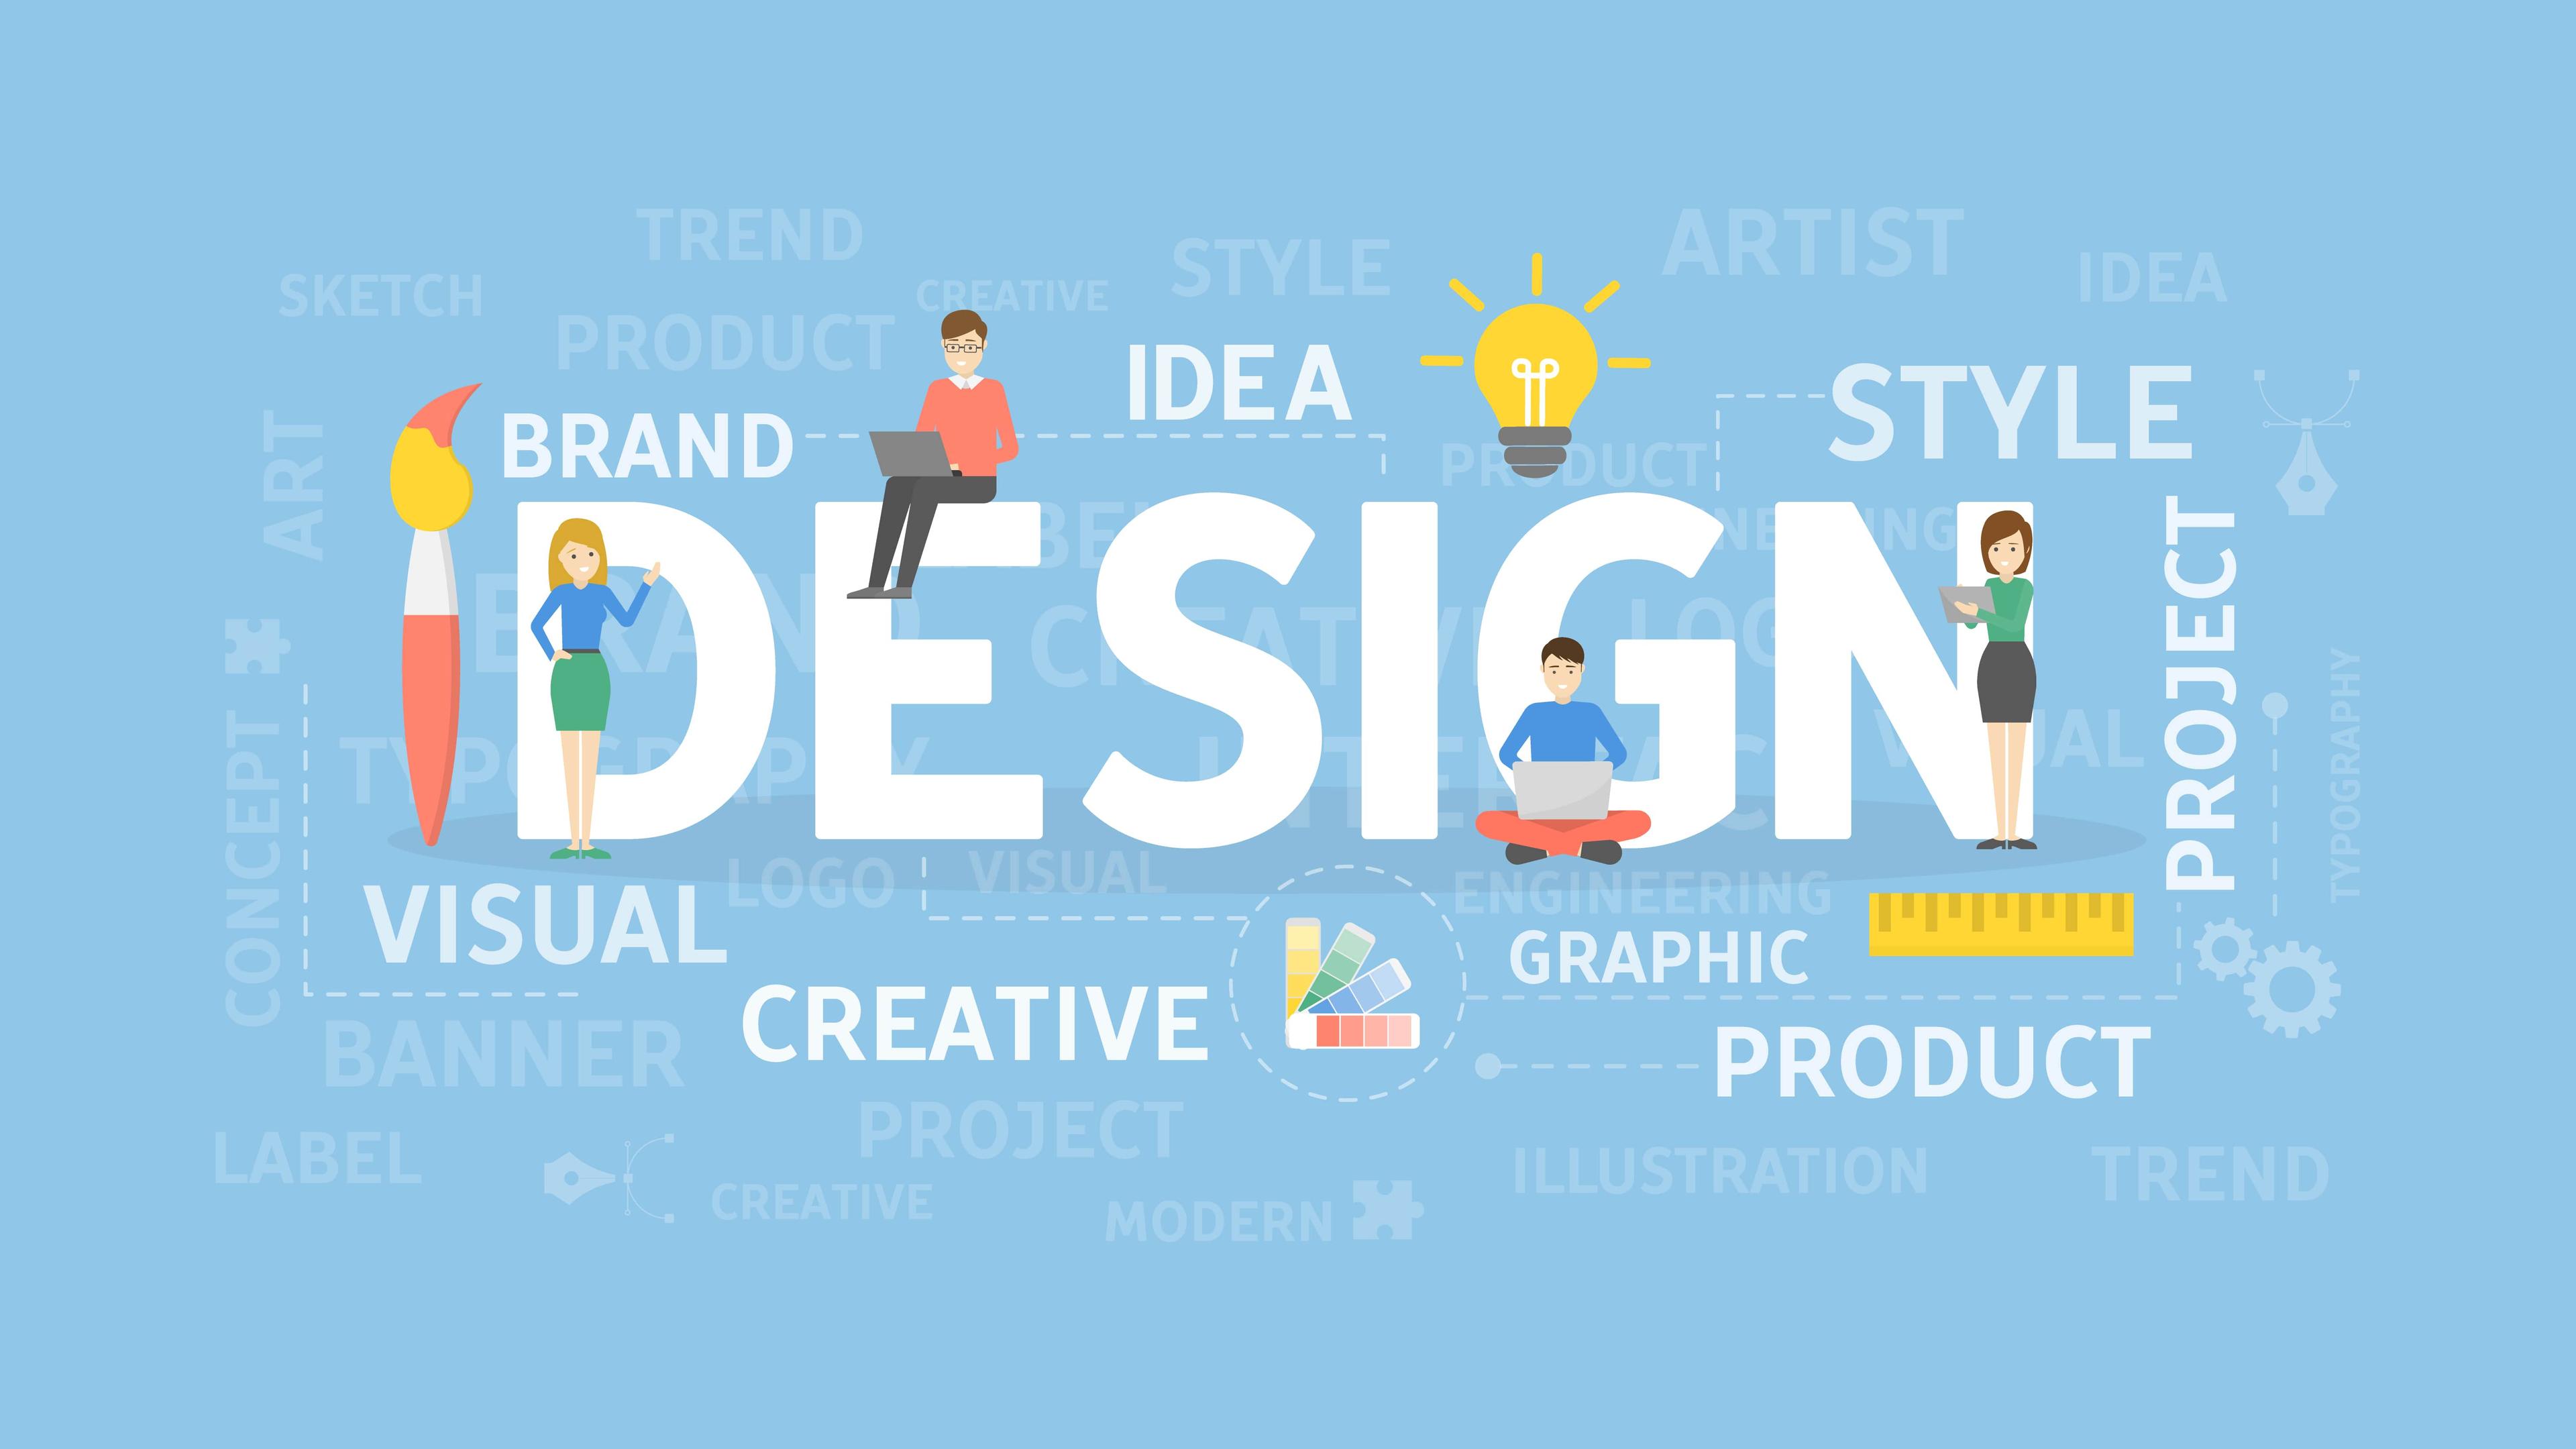 Design projects, ideas, and creativity concept